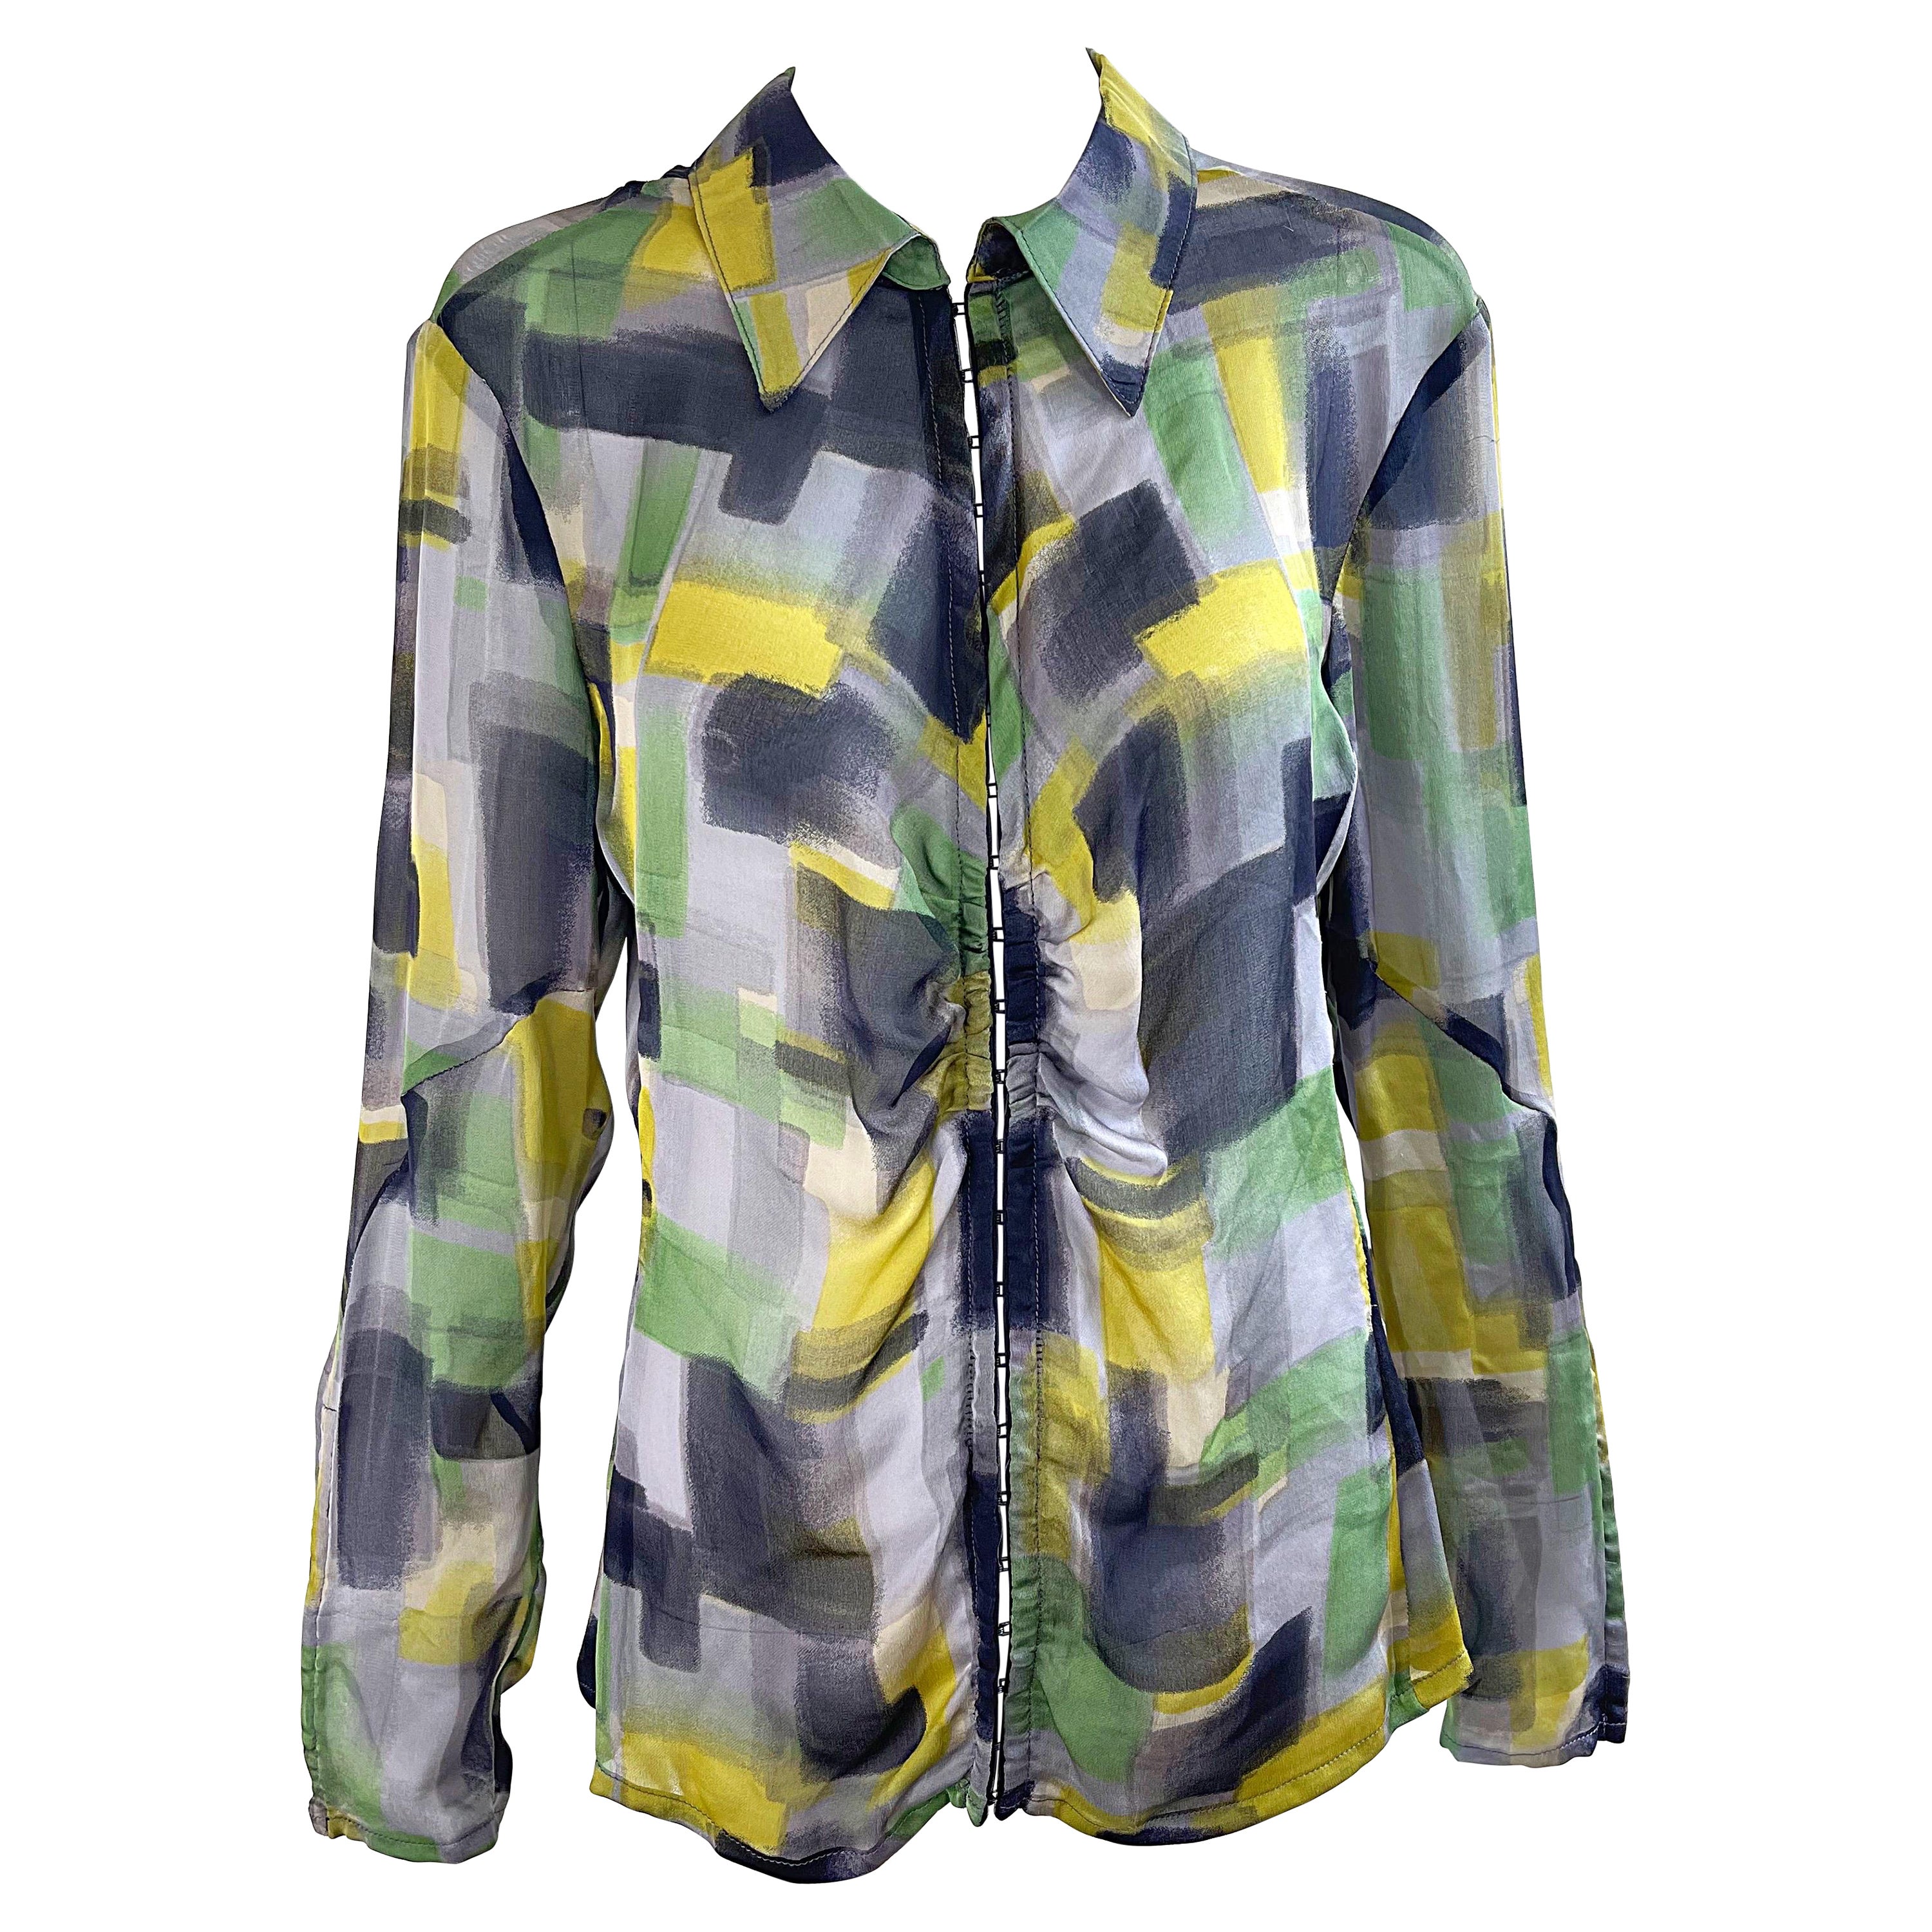 NWT Zenobia Saks 5th Avenue Size 12 Sheer Silk Chiffon Abstract Print Blouse Top For Sale